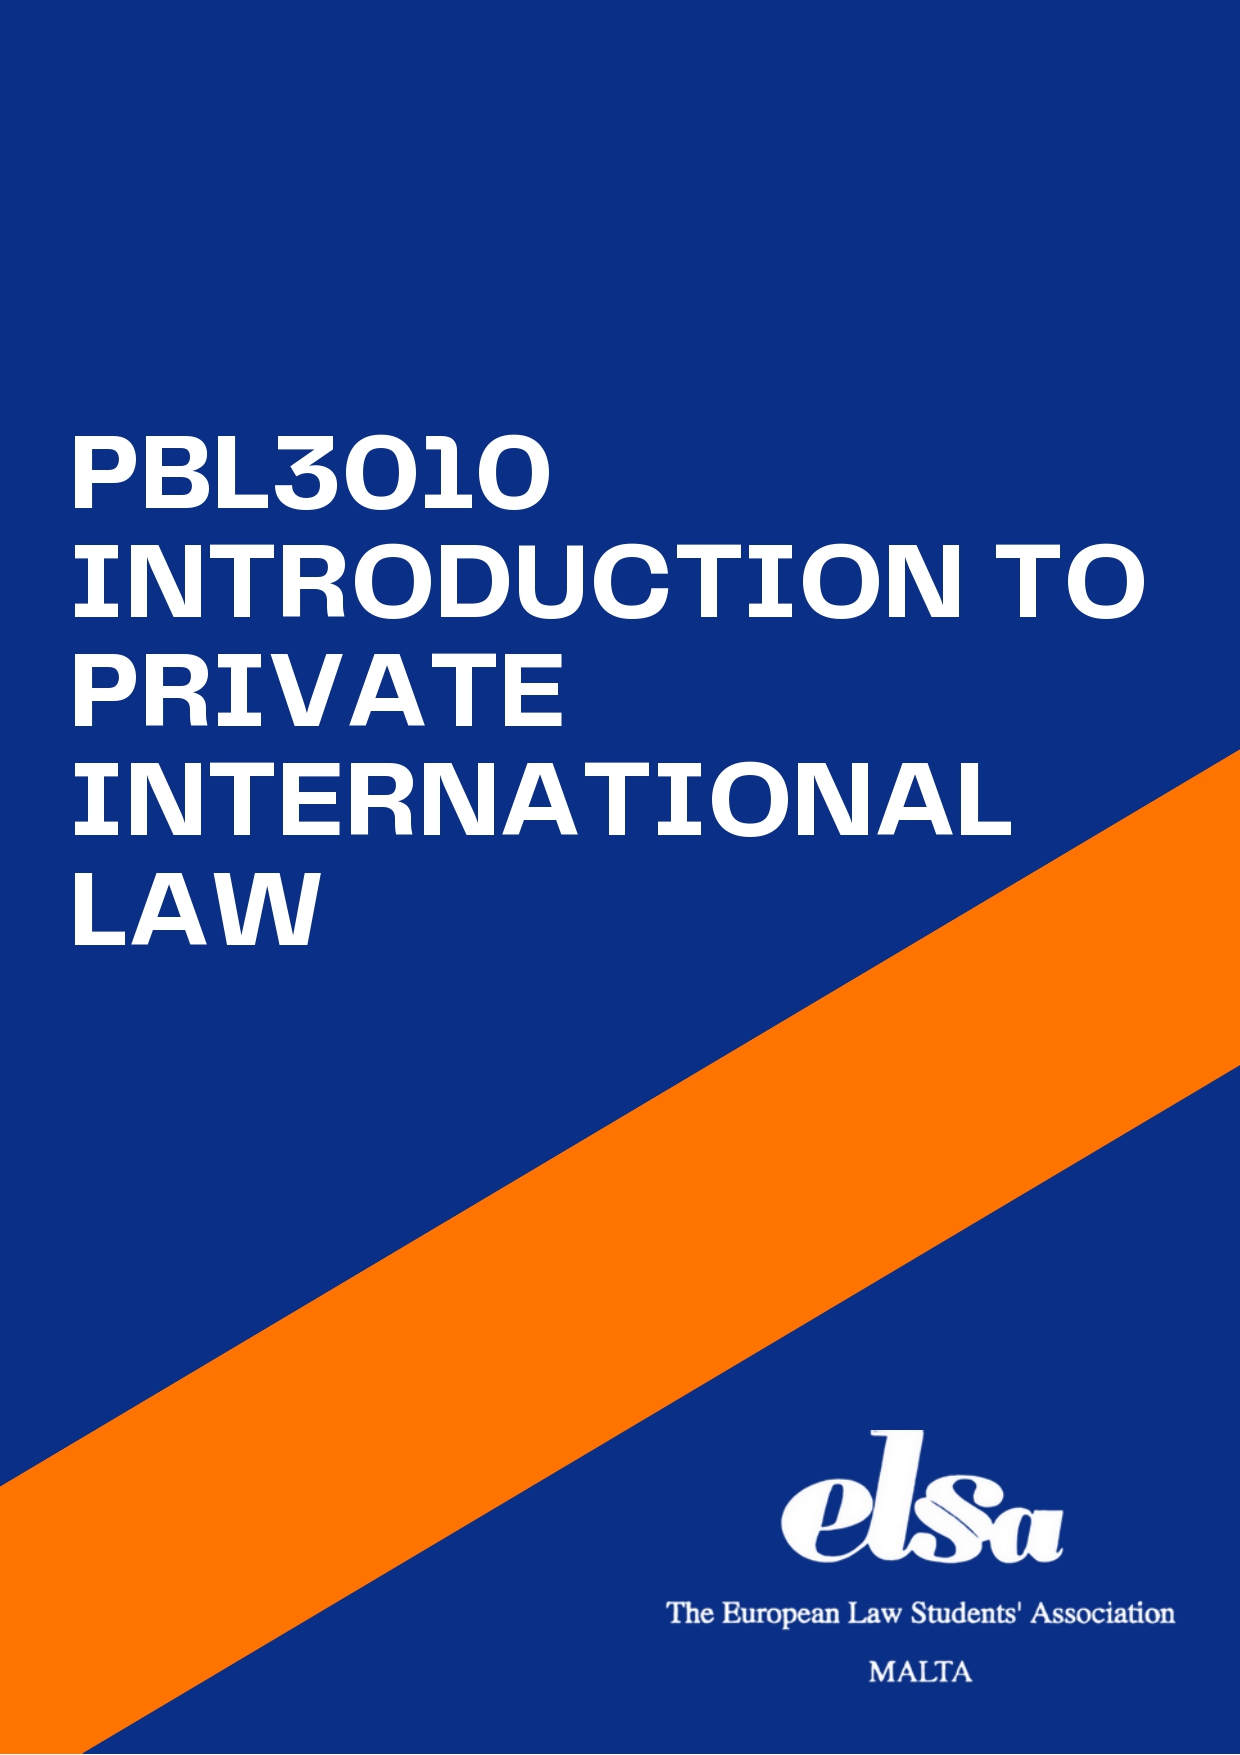 PBL3010 - Introduction to Private International Law